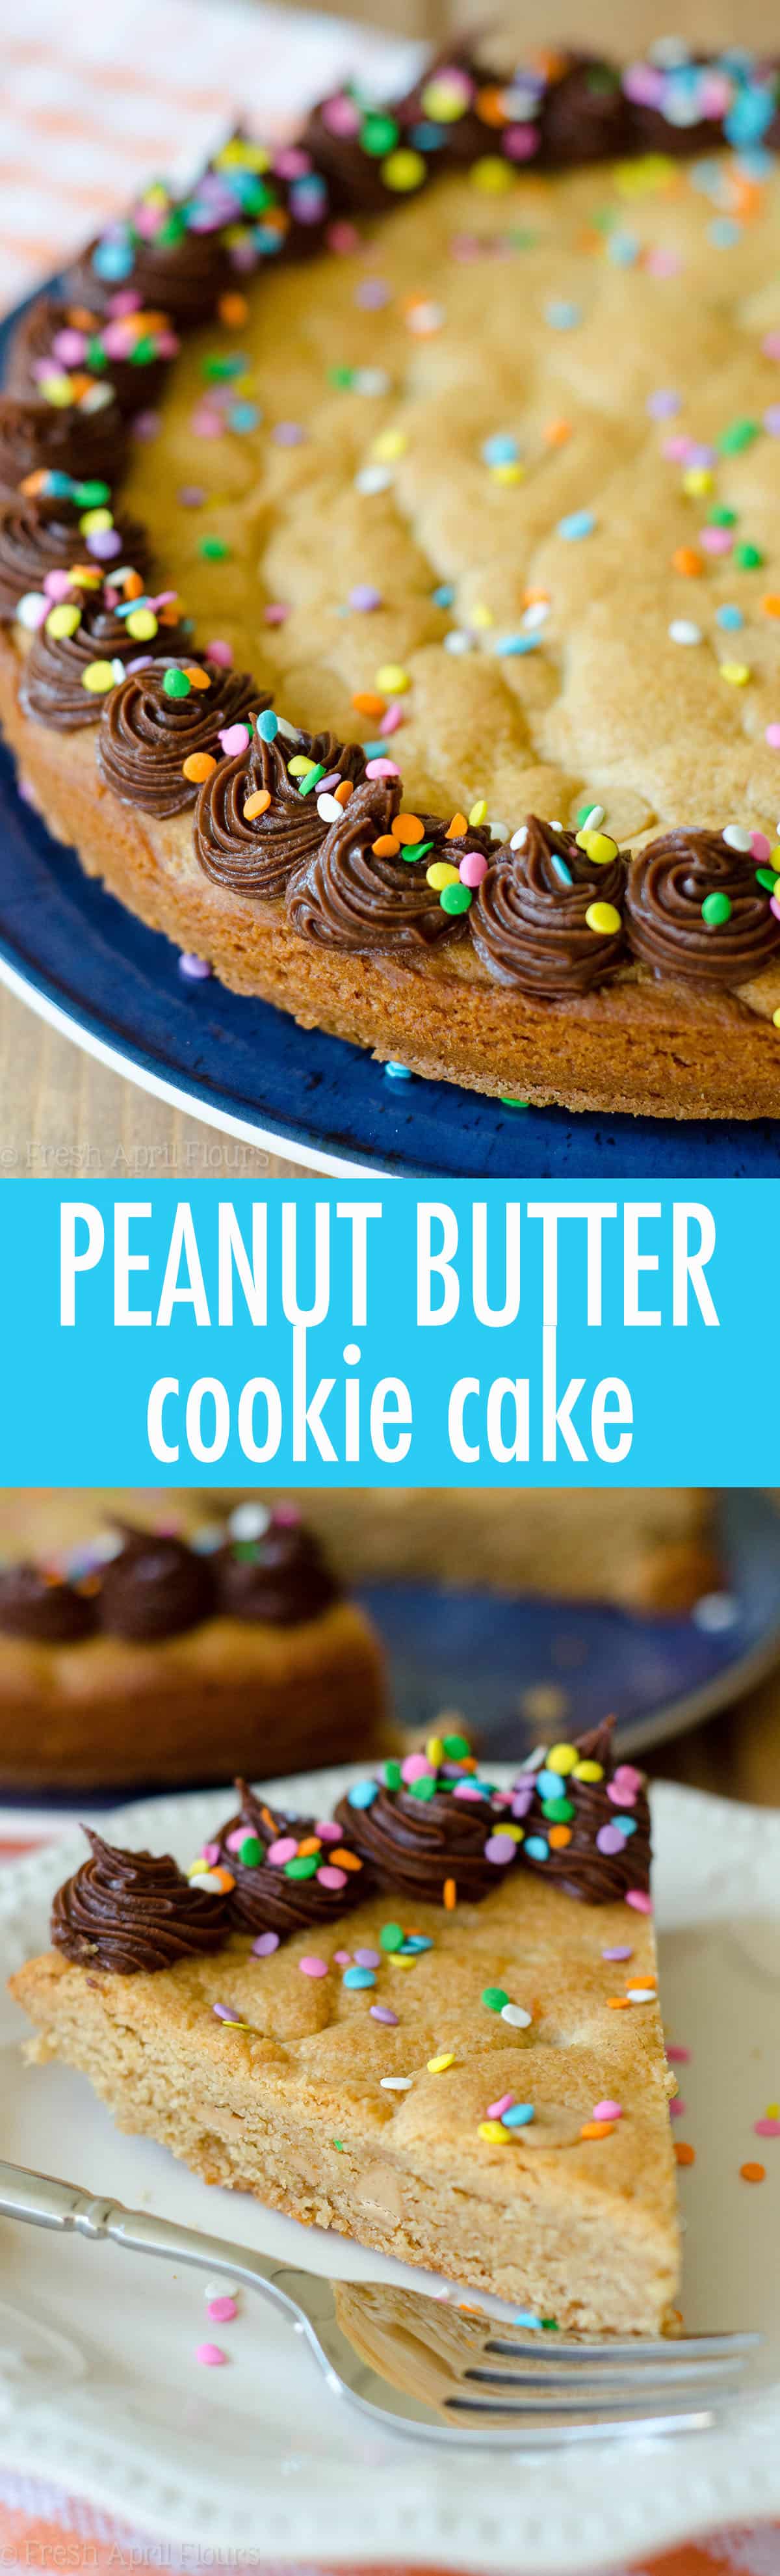 Peanut Butter Cookie Cake: A peanut buttery twist on the classic cookie cake. Top with chocolate, peanut butter, or vanilla frosting and get to decorating! via @frshaprilflours